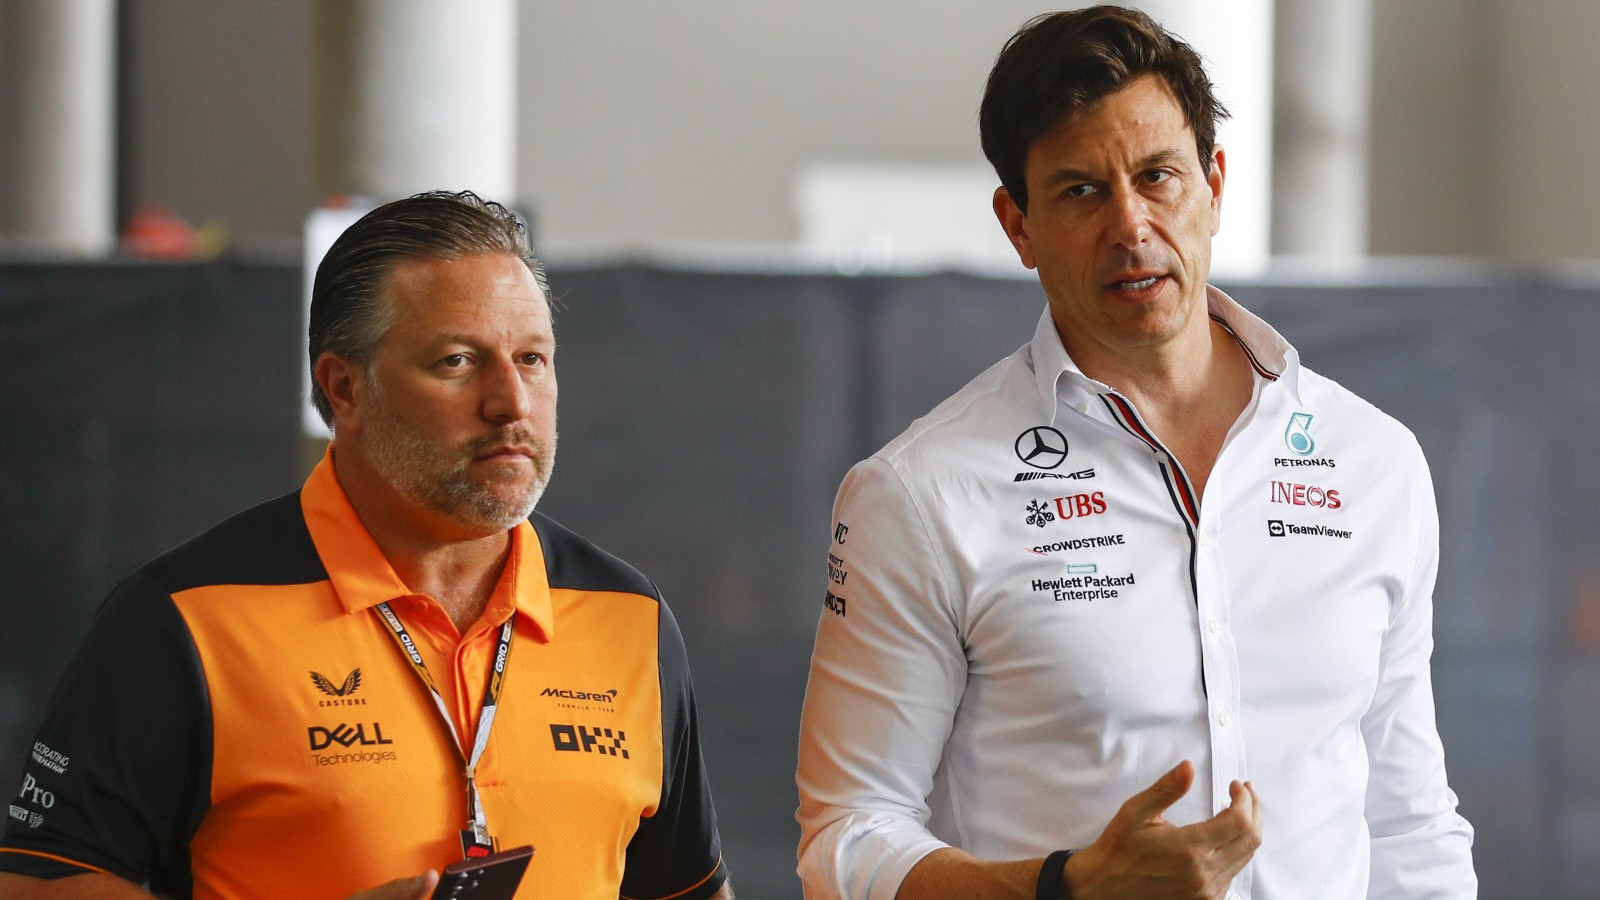 Zak Brown, McLaren and Toto Wolff, Mercedes, talk in Miami. United States, May 2022.